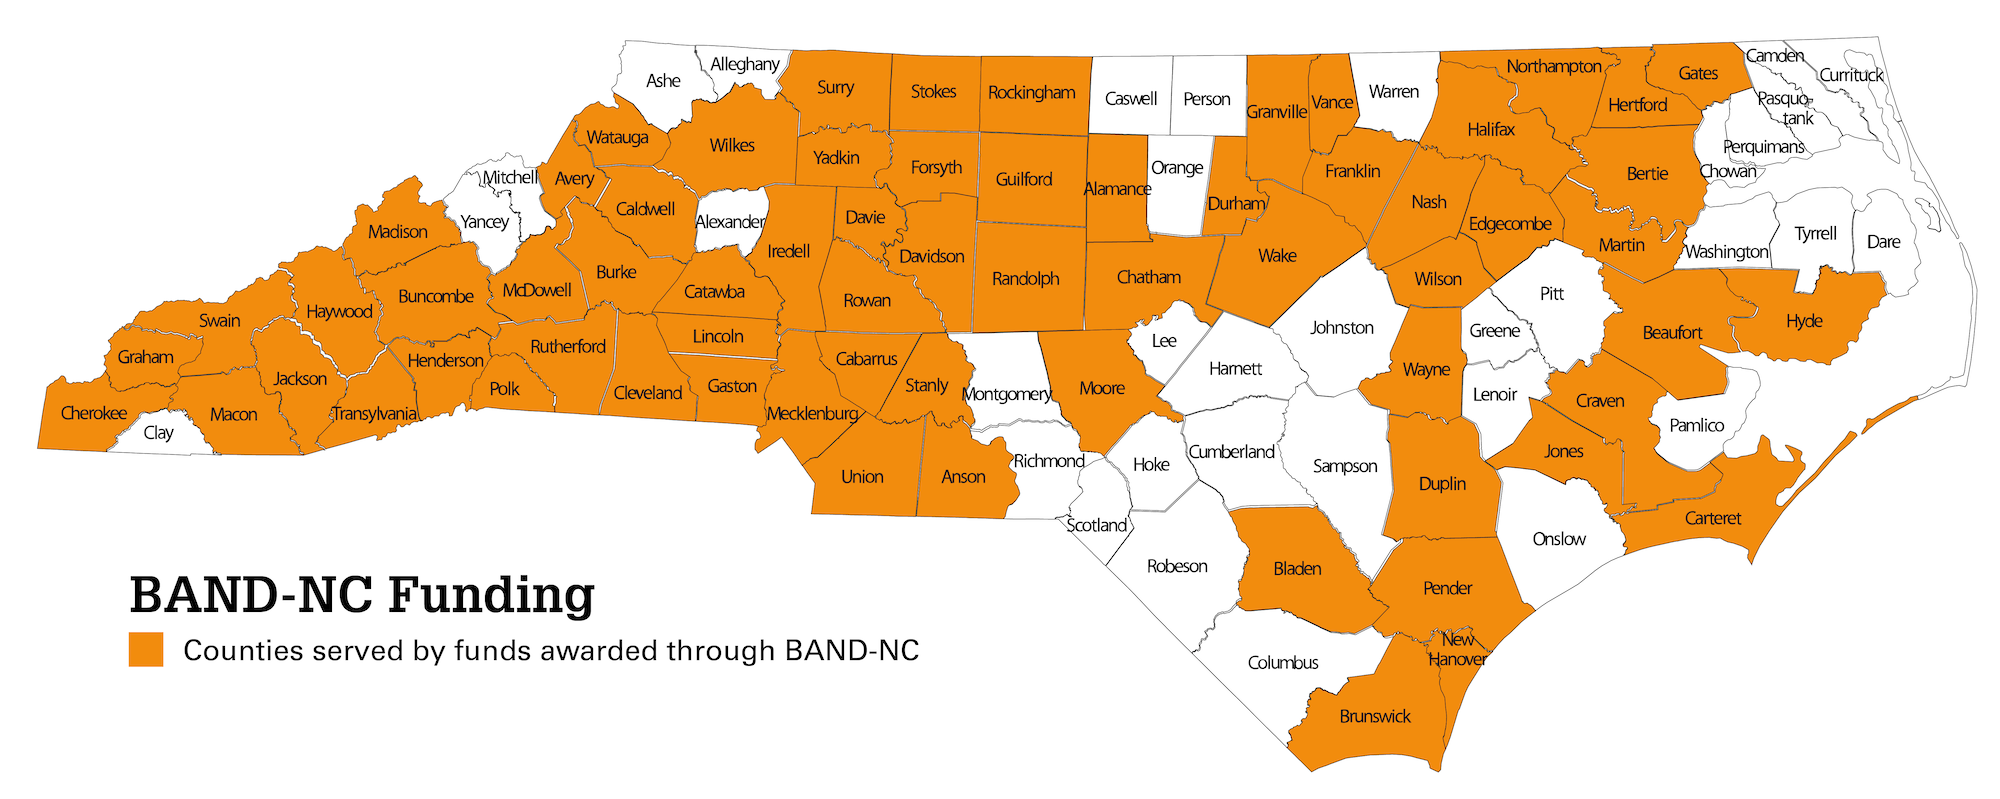 NC County map with counties that have received BAND-NC funding highlighted in orange